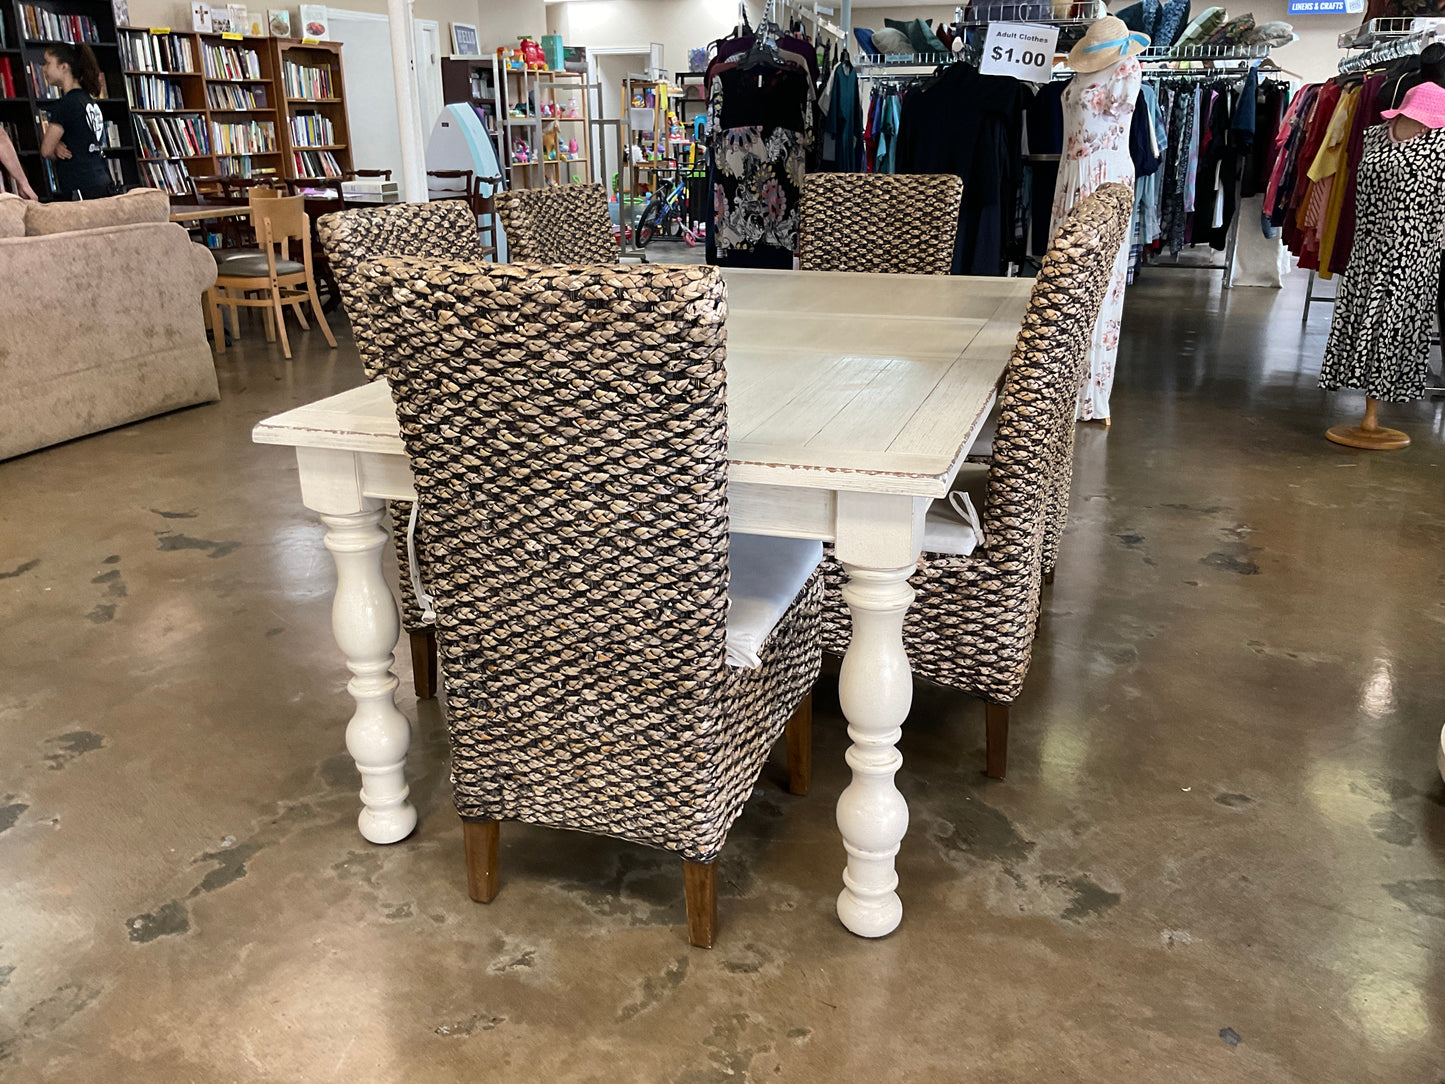 Aberdeen Wooden Rectangular Table With 6 Wicker Woven Chairs **AT OUR FIRST STREET LOCATION**